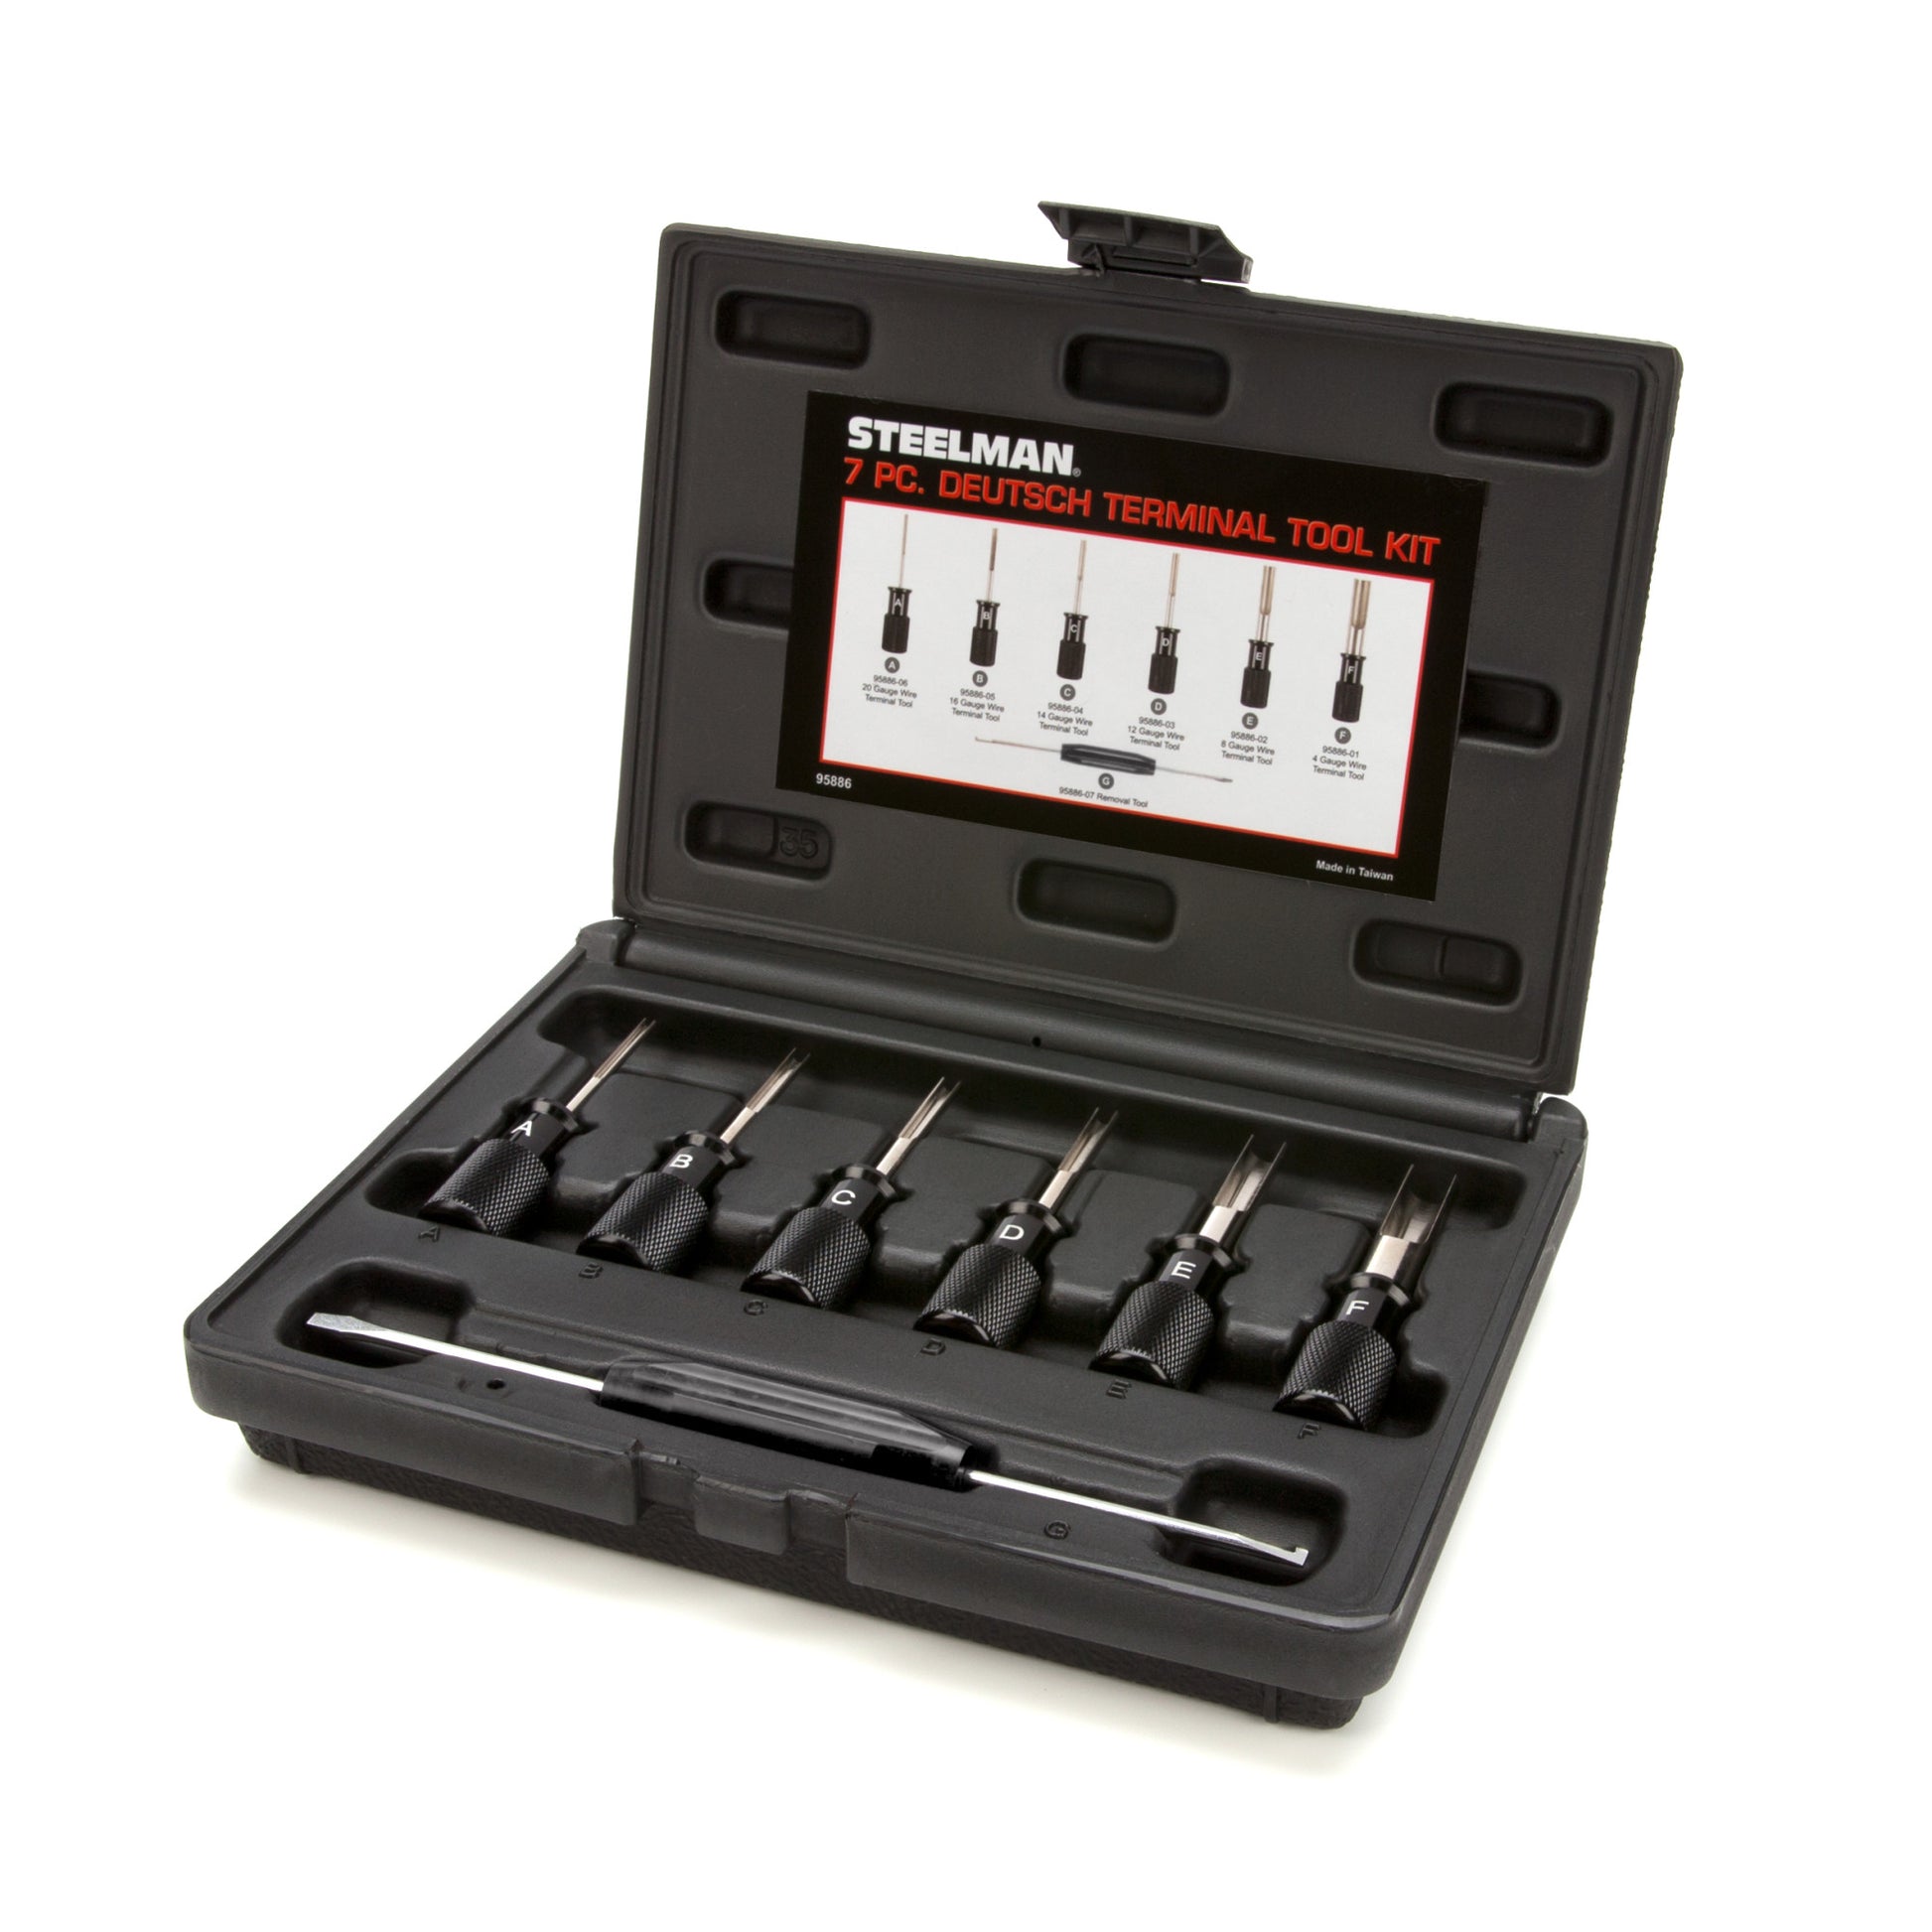 7pc Deutsch Terminal Release/Removal Tool Kit - 4, 8, 12, 14, 16